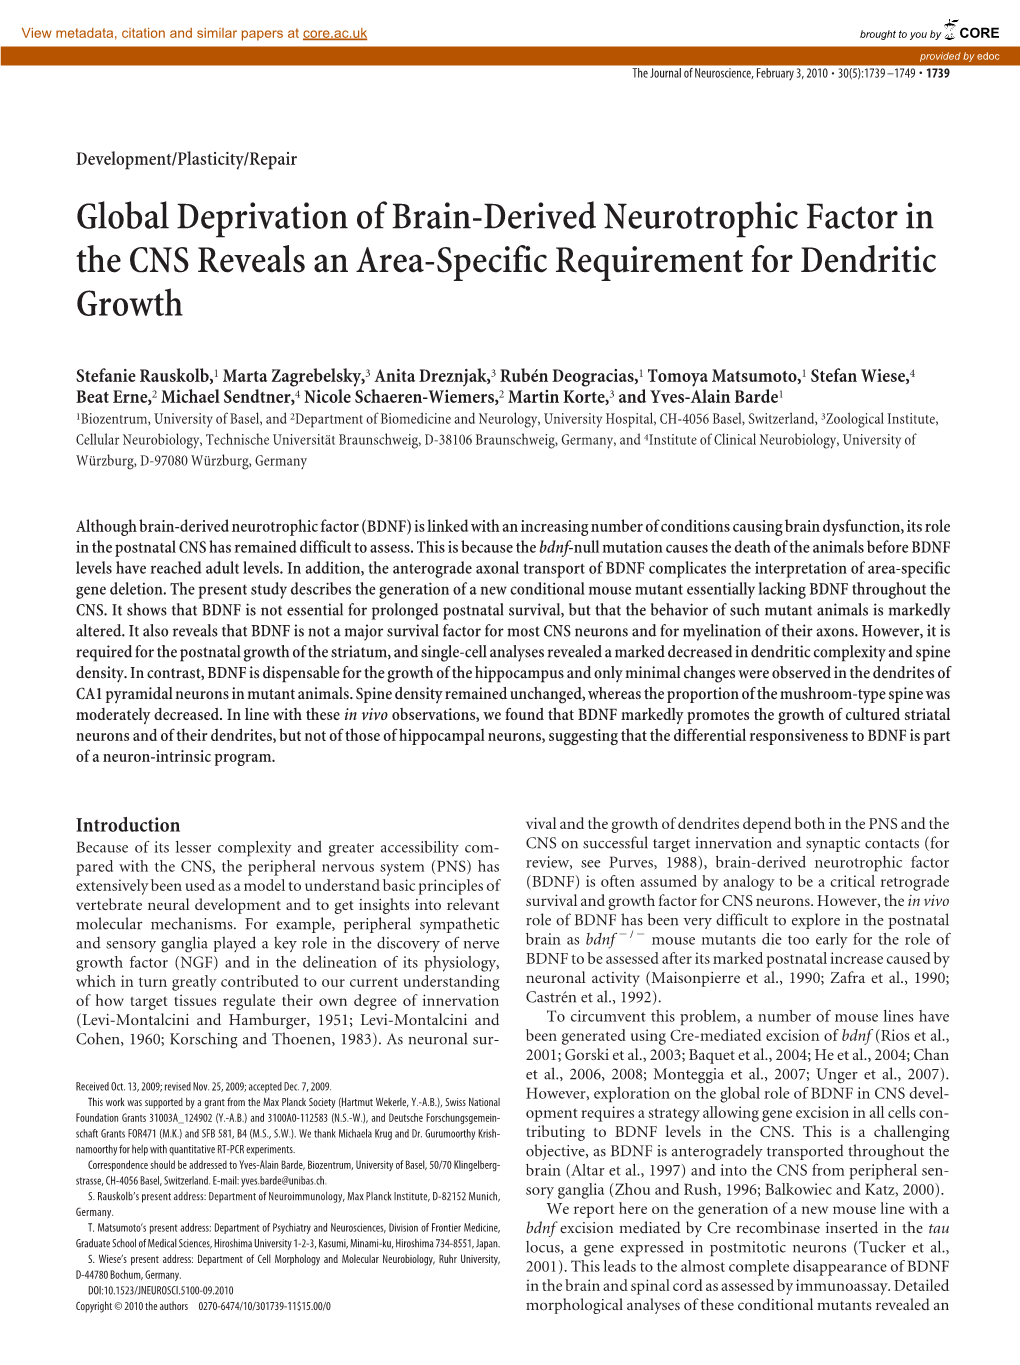 Global Deprivation of Brain-Derived Neurotrophic Factor in the CNS Reveals an Area-Specific Requirement for Dendritic Growth